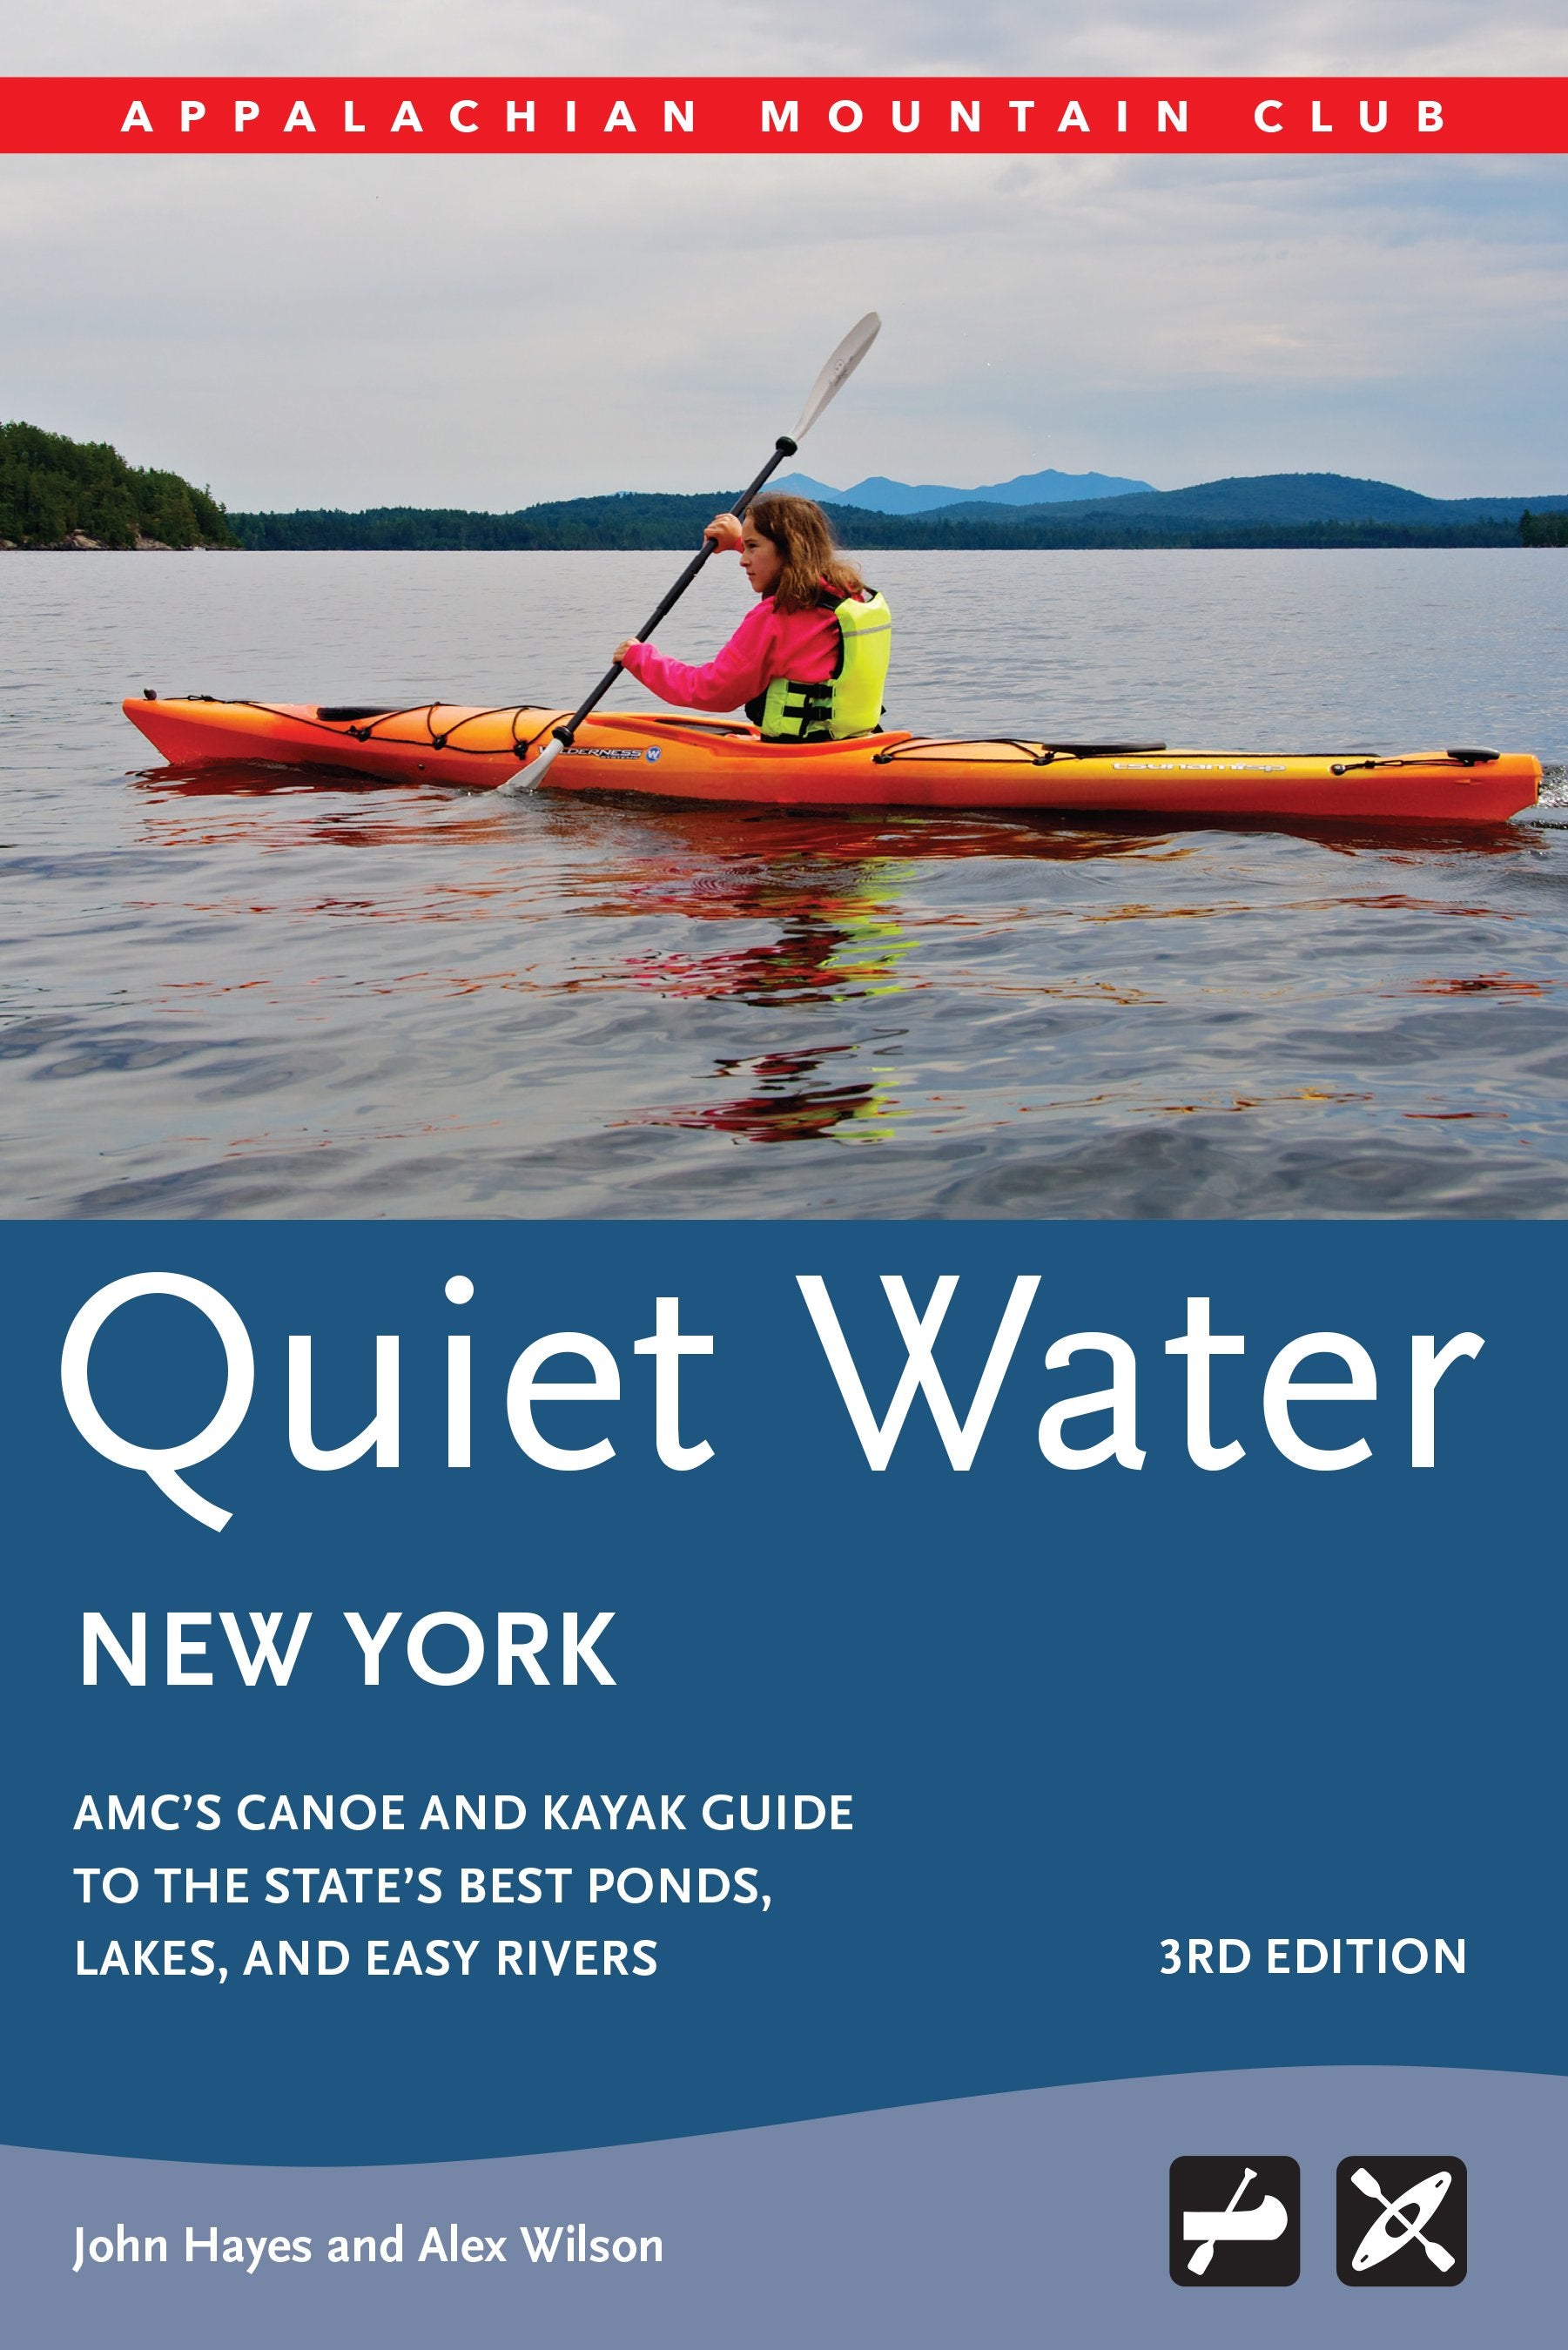 Quiet Water New York, 3rd Edition